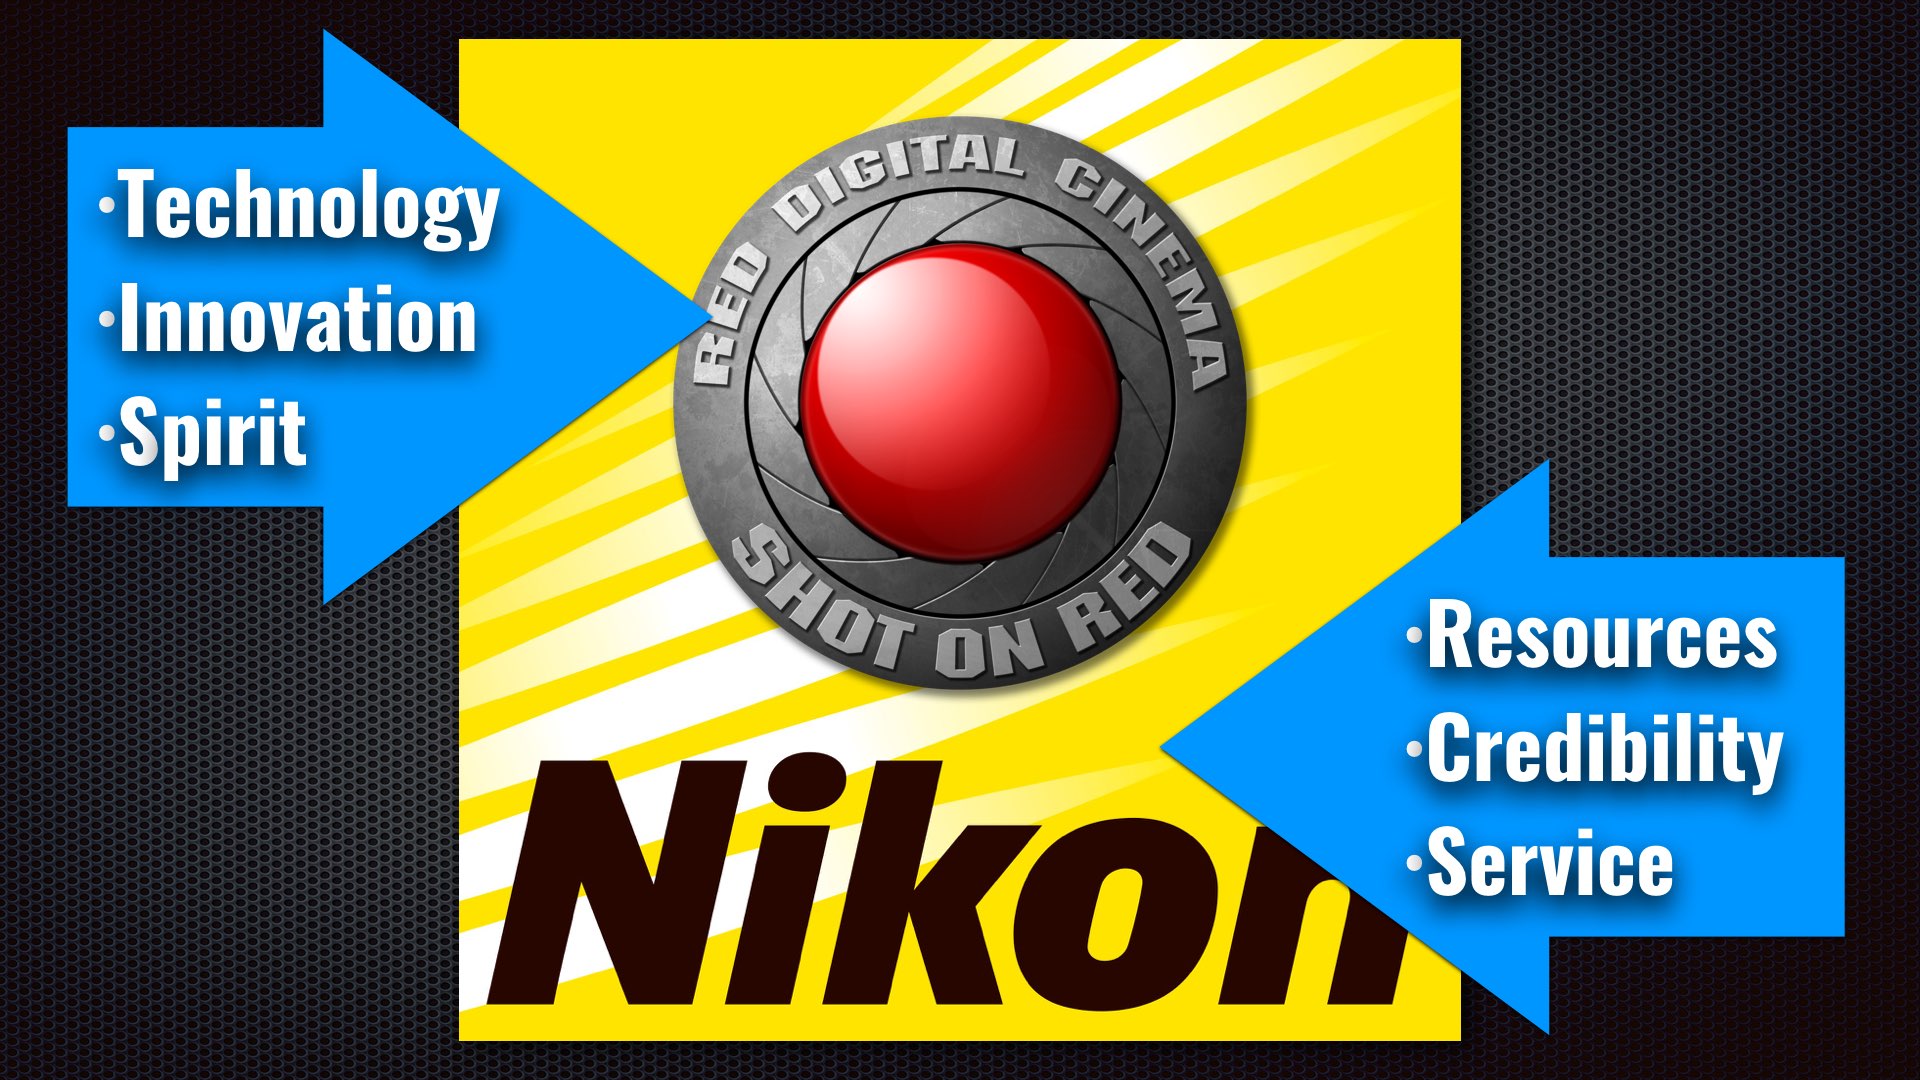 RED & Nikon: A Possible Synergy